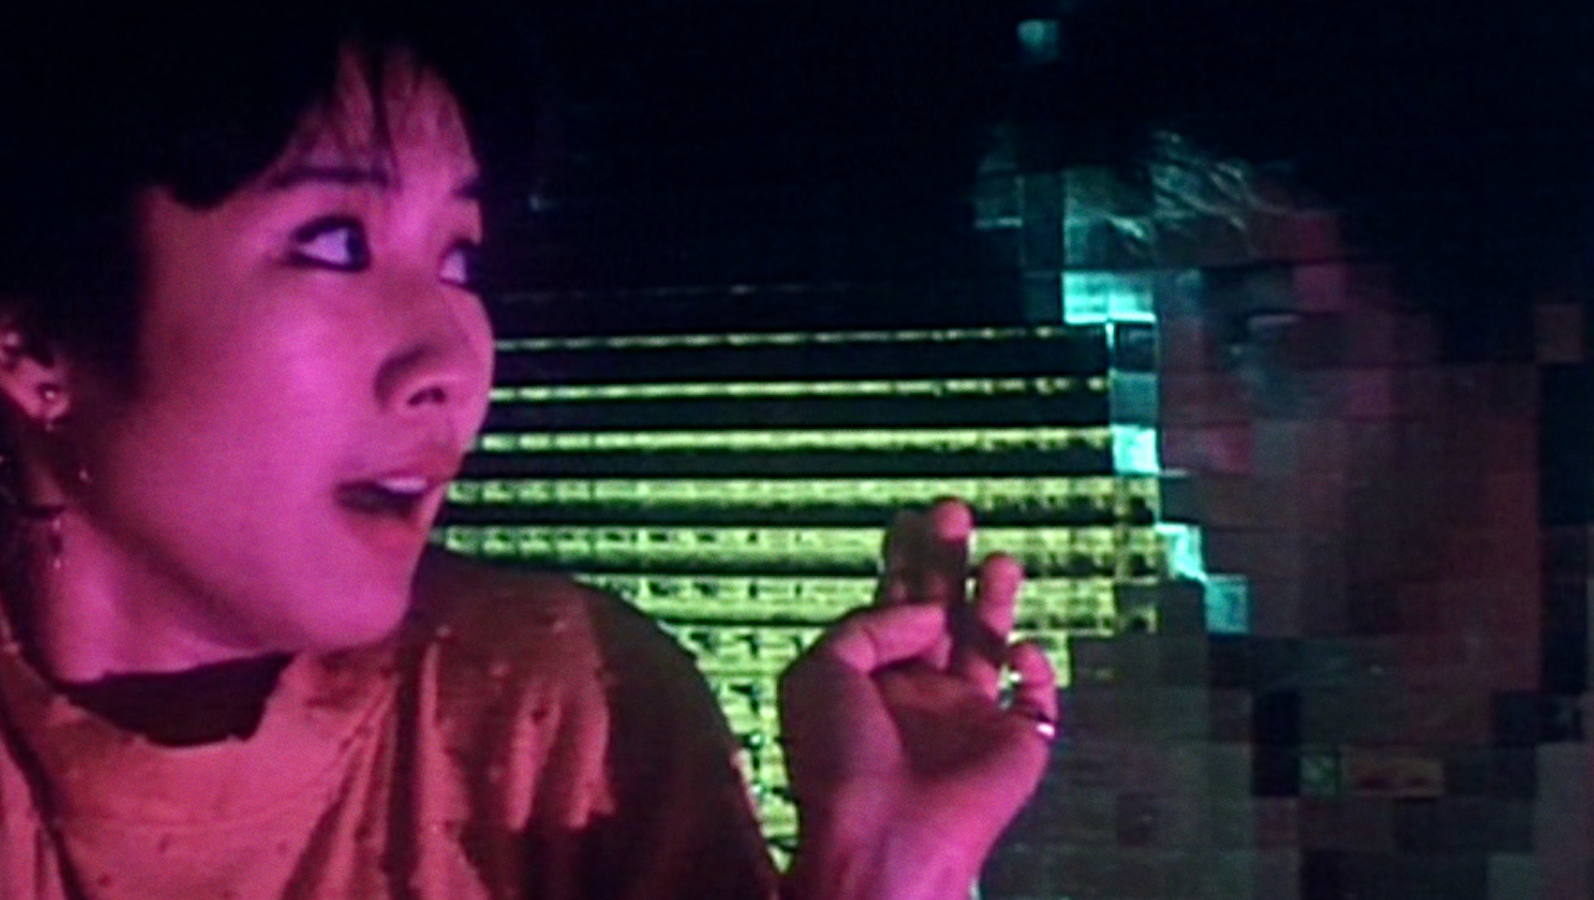 A woman bathed in purple light recoils in terror from a face behind a distorting glass window staring at her